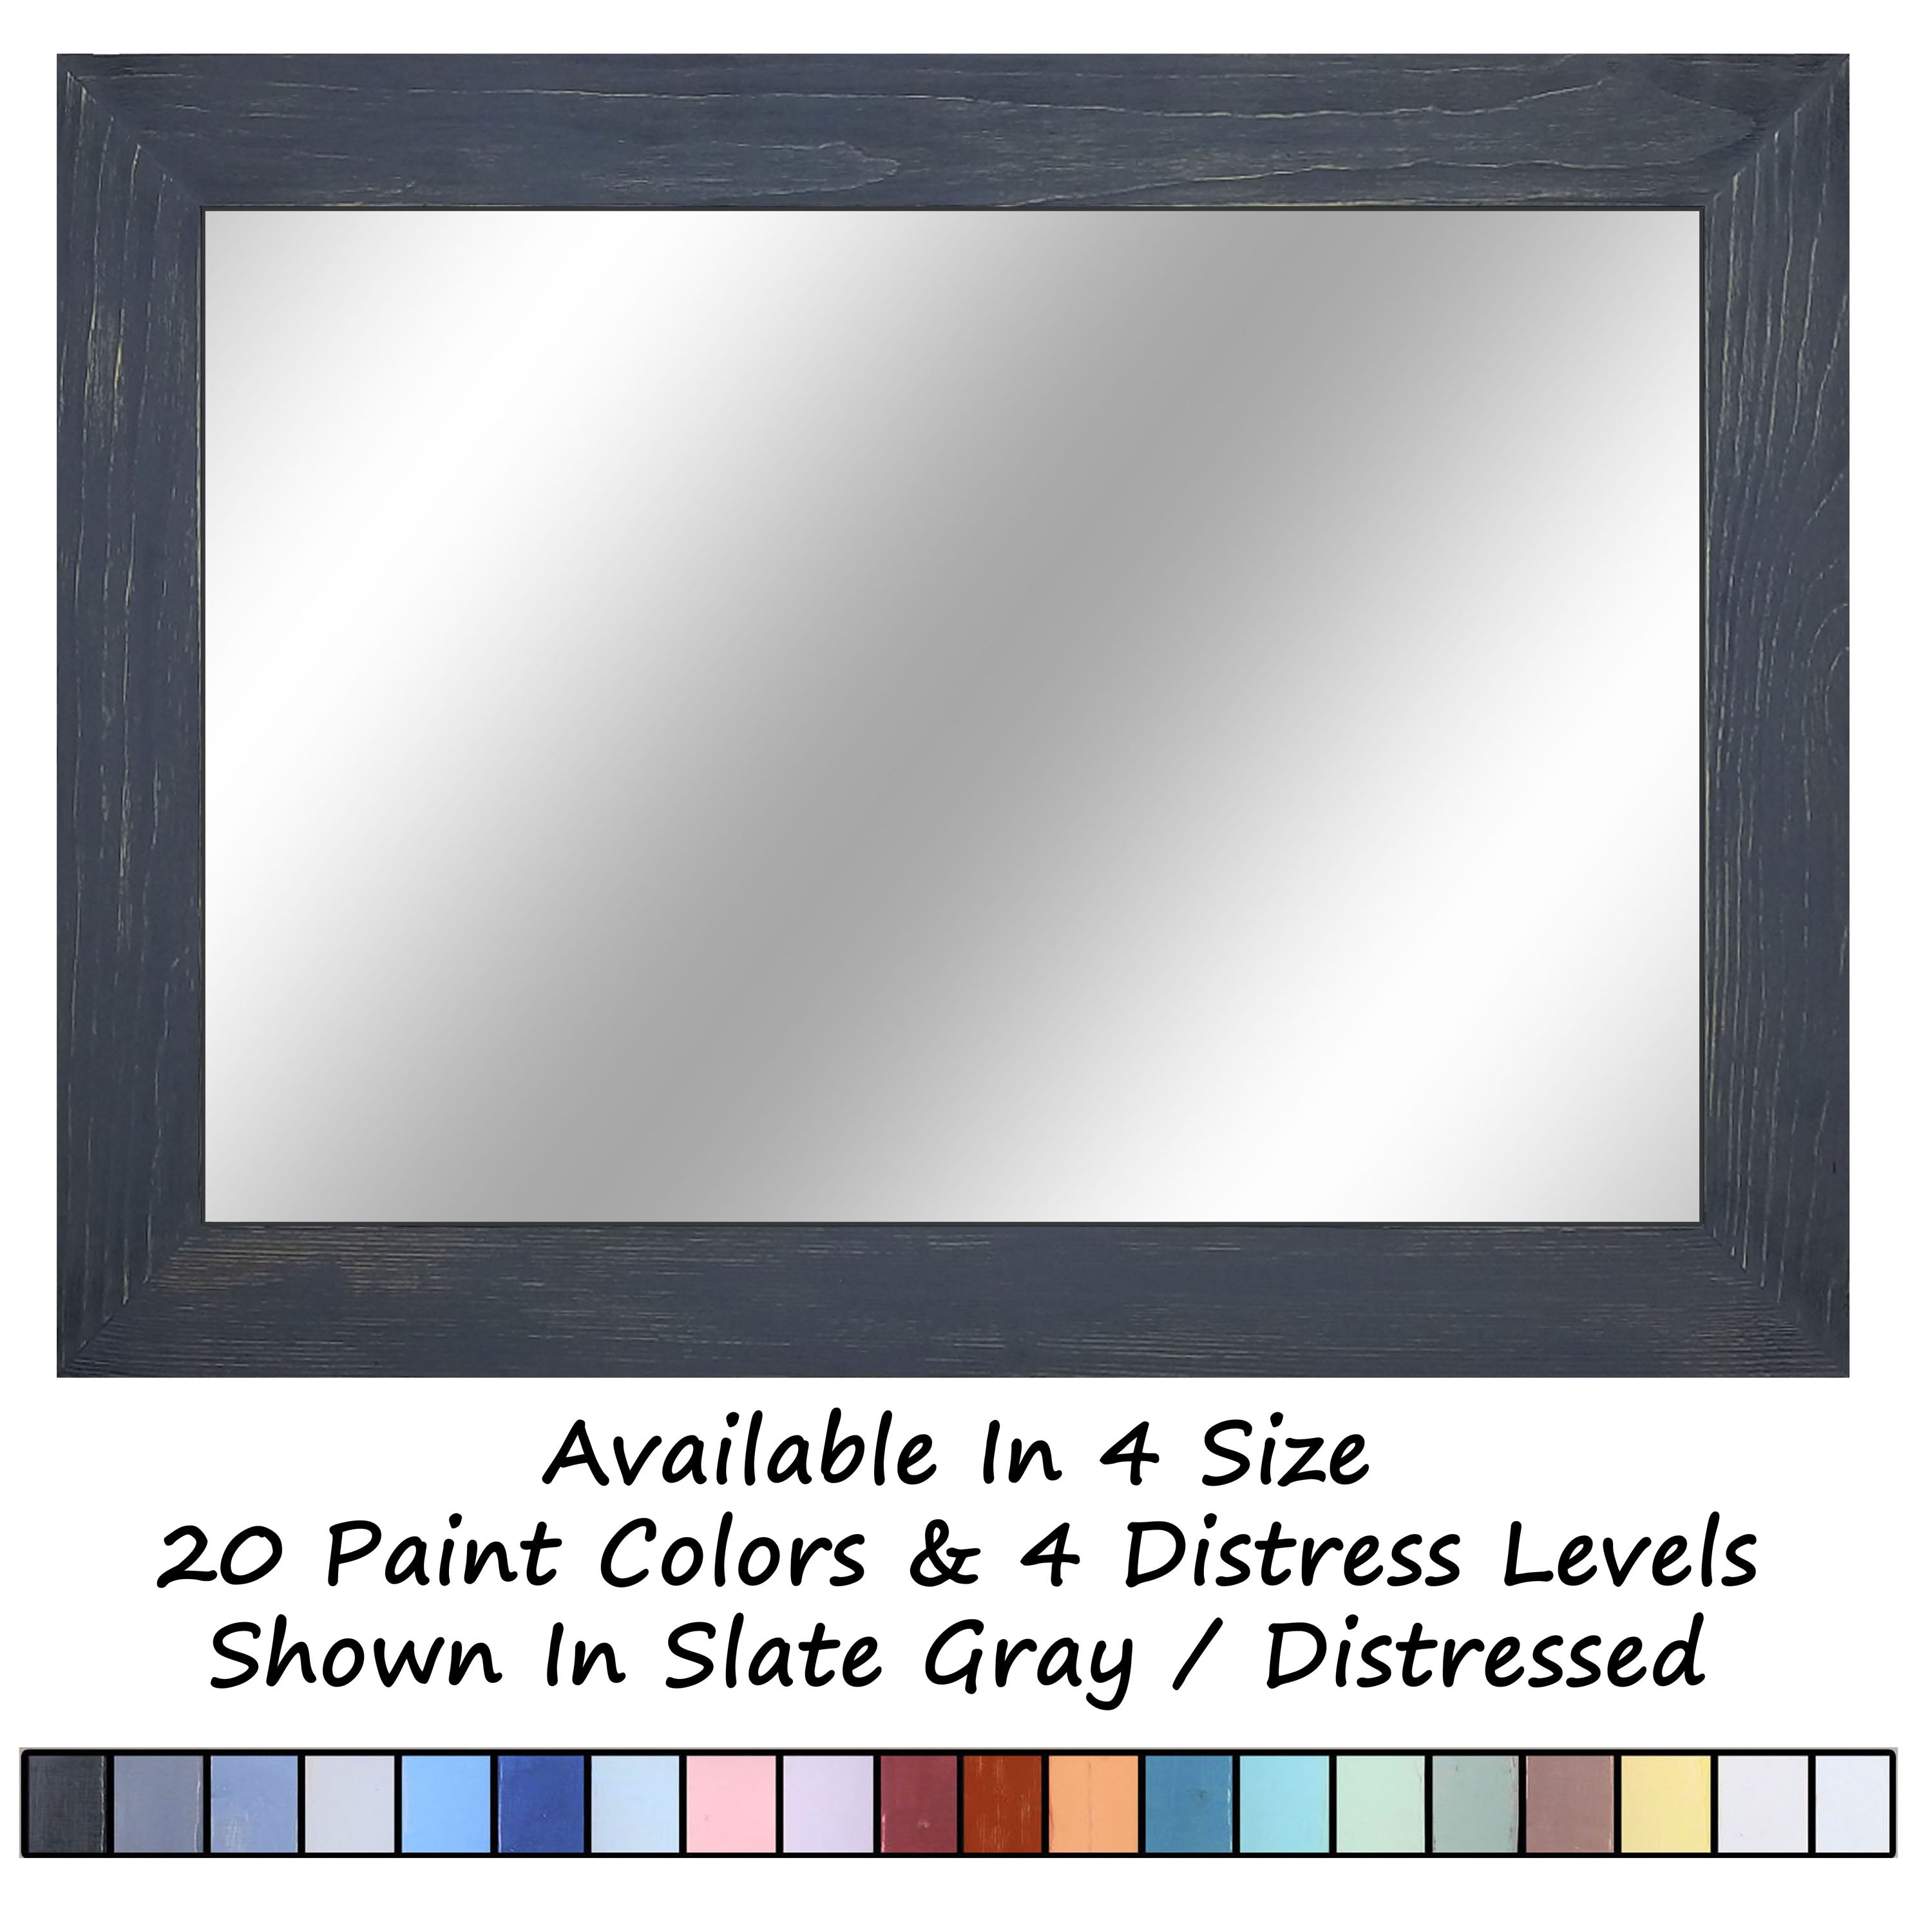 Shiplap Rustic Wood Framed Mirror, 20 Paint Colors - Shown In Slate Gray